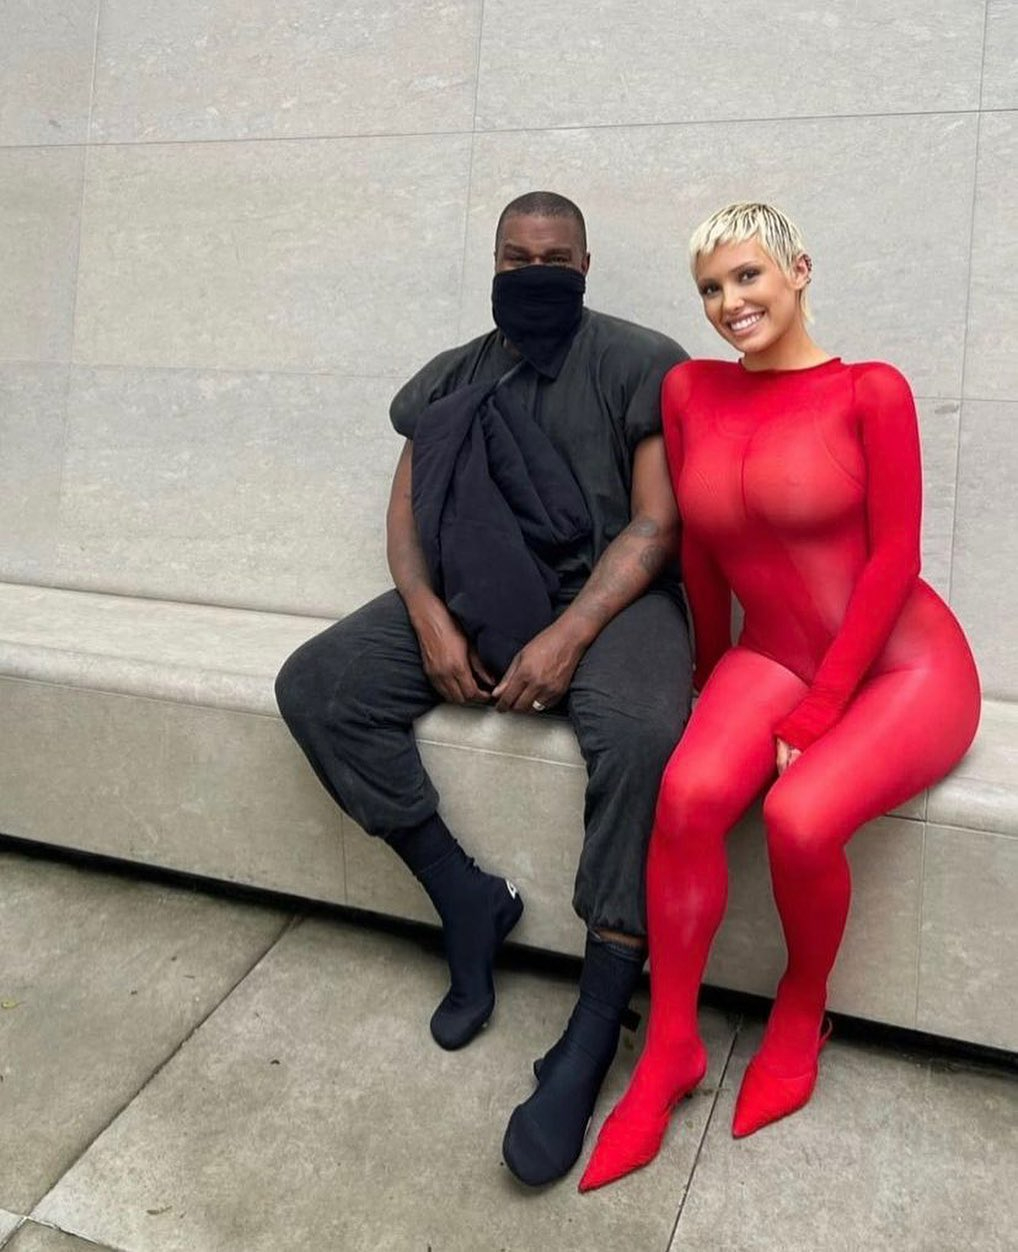 Bianca wore a red bodysuit and her blonde hair short in April and then Kim wore a black bodysuit and sported a bob cut days later